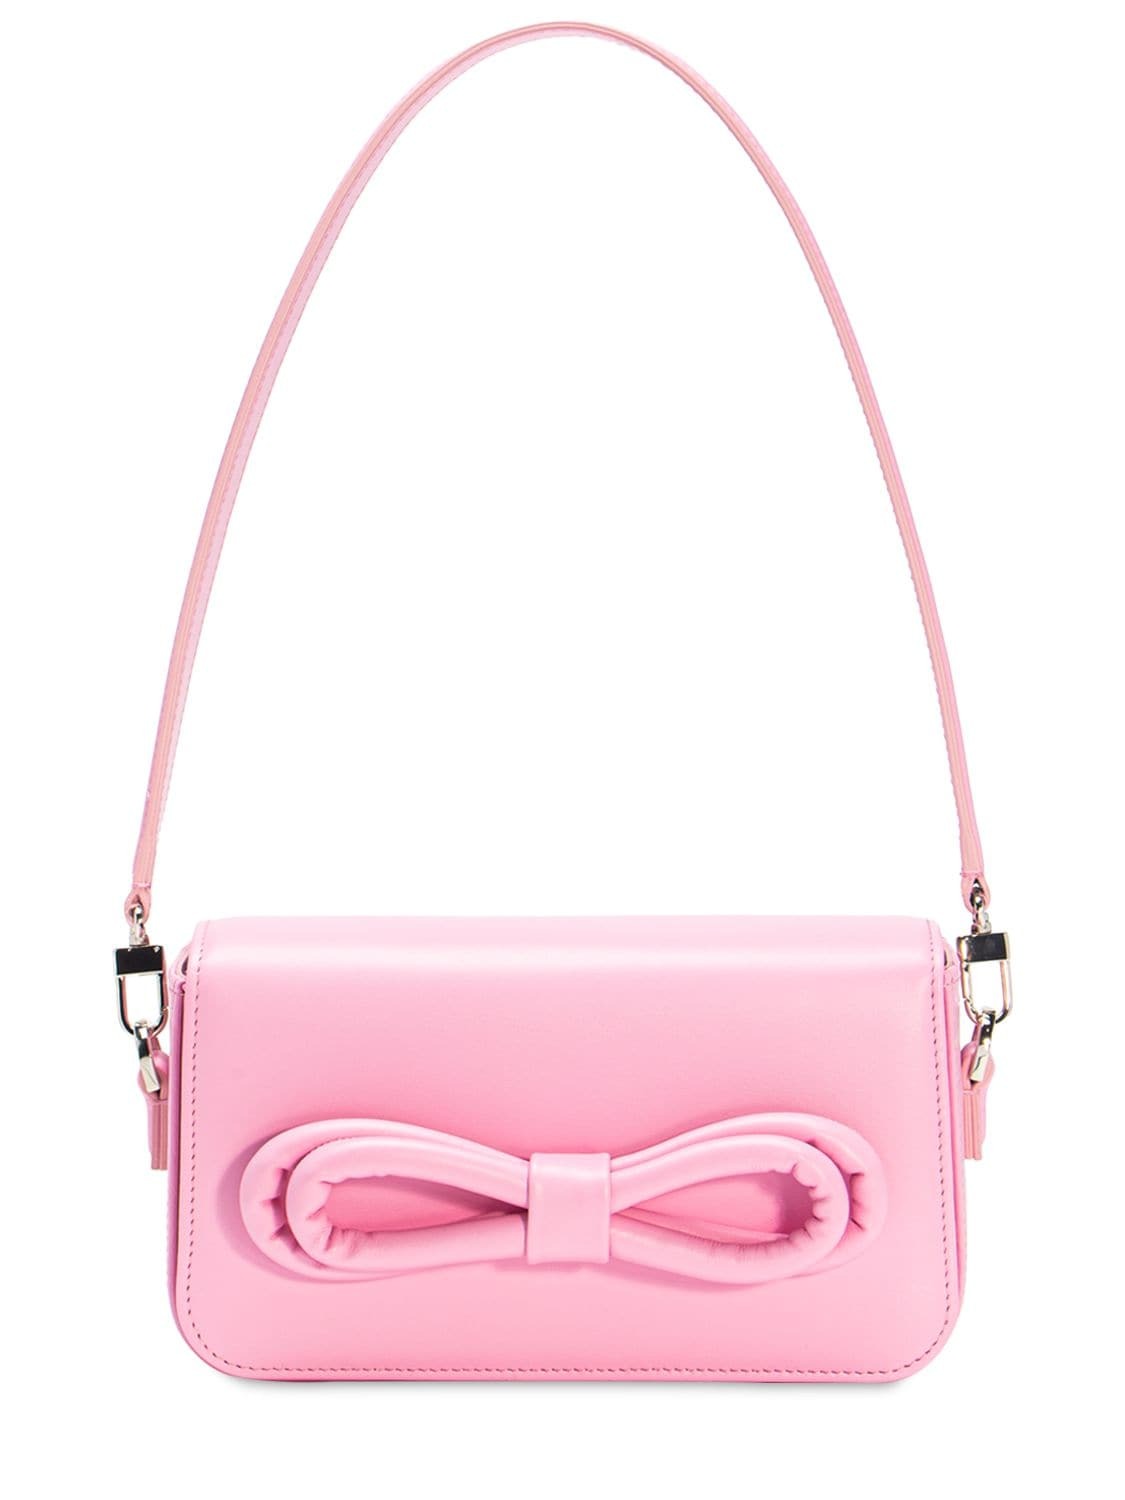 MACH & MACH Puffed Bow Leather Shoulder Bag in pink